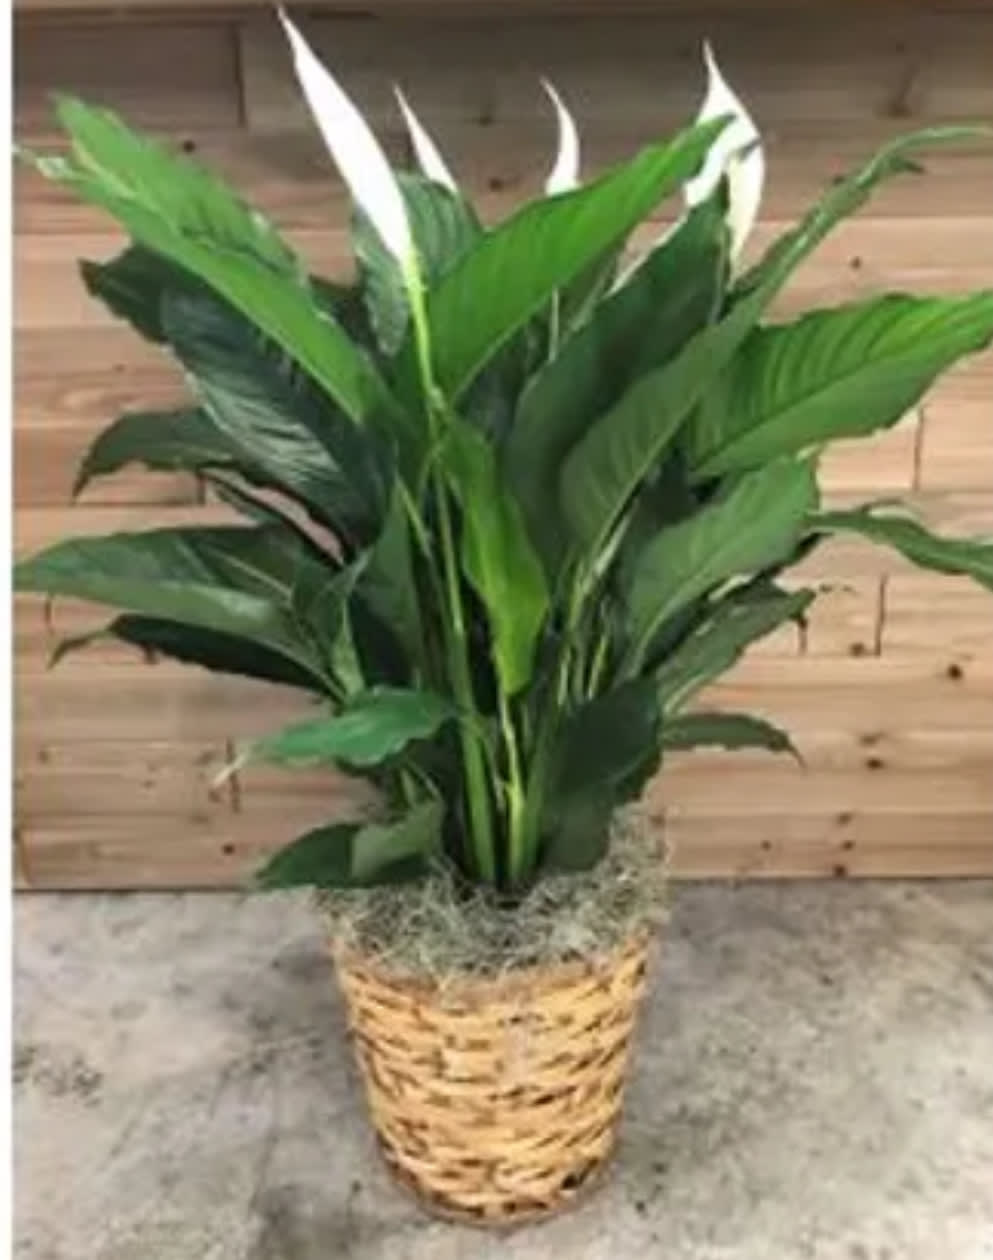 An evergreen perennial plant with large leaves. A flowering plant that produces